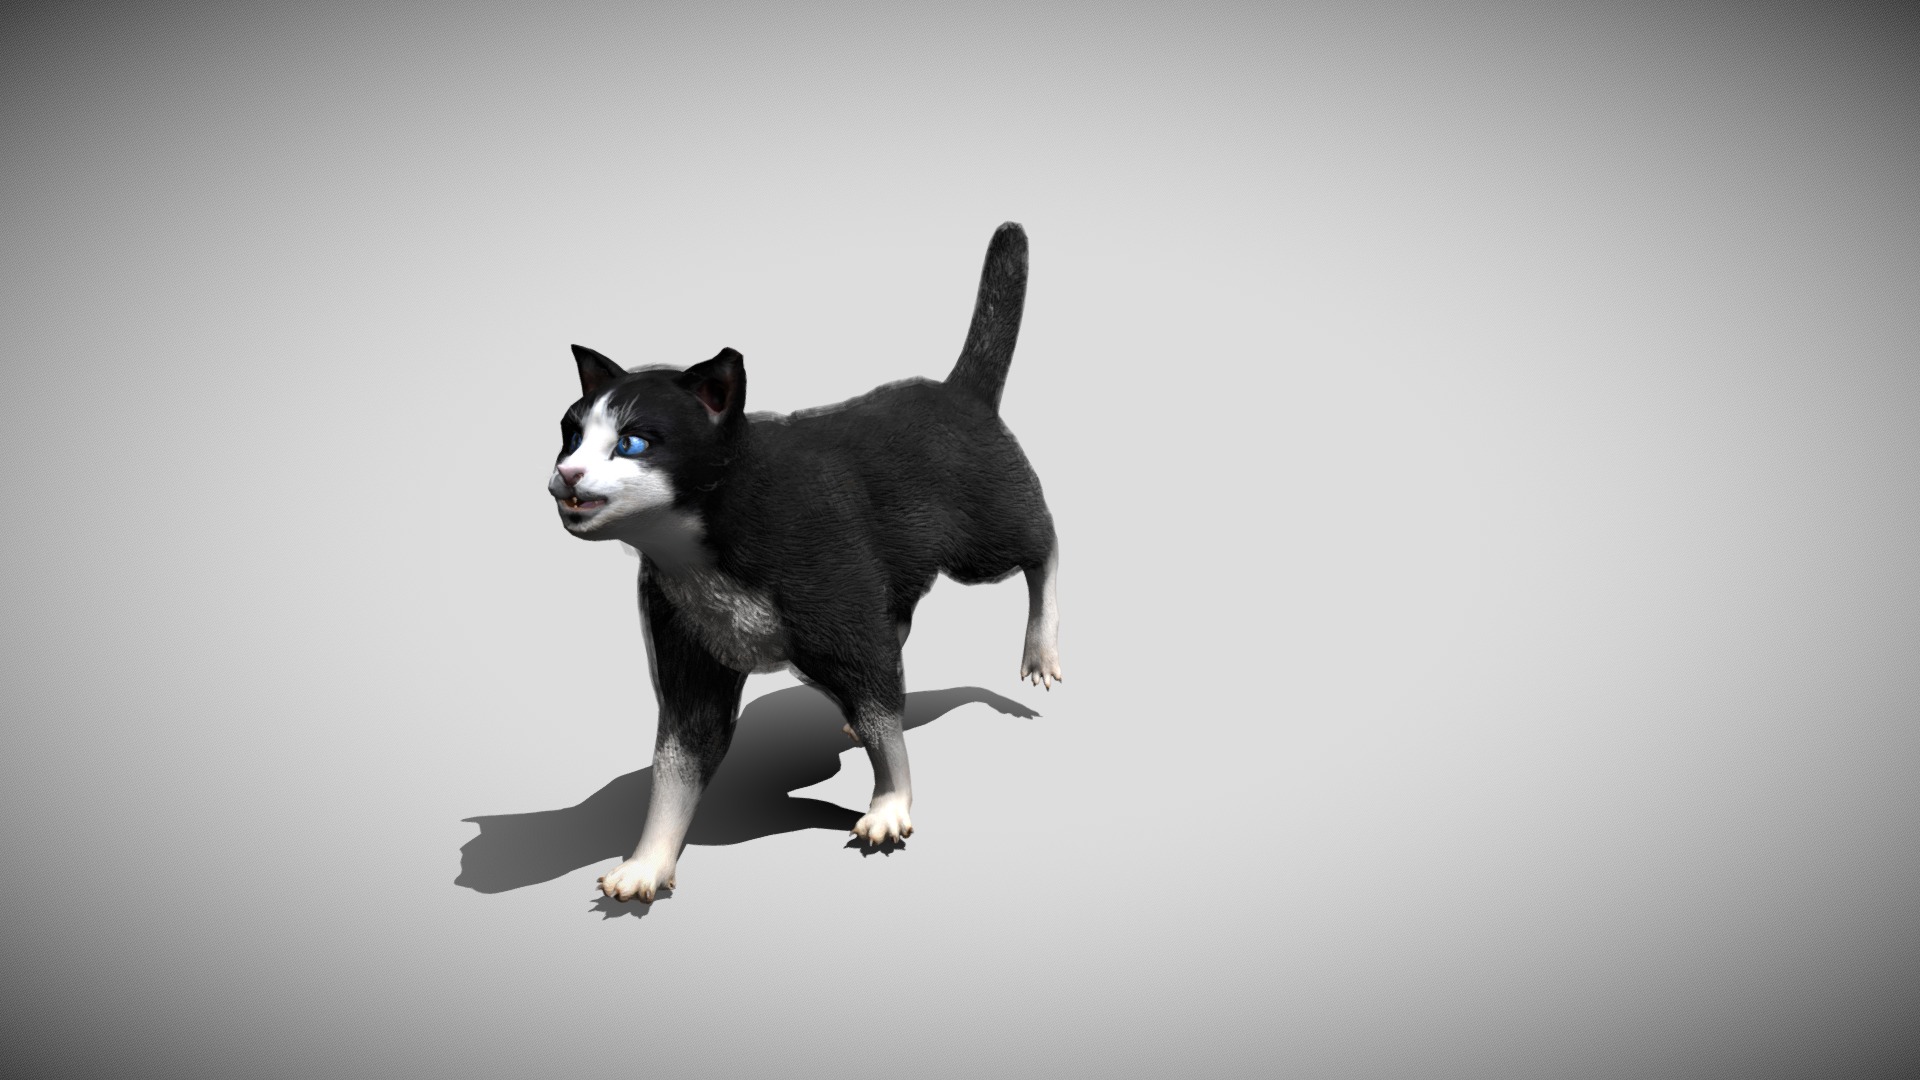 3D model Black Cat with animations - This is a 3D model of the Black Cat with animations. The 3D model is about a black and white cat.